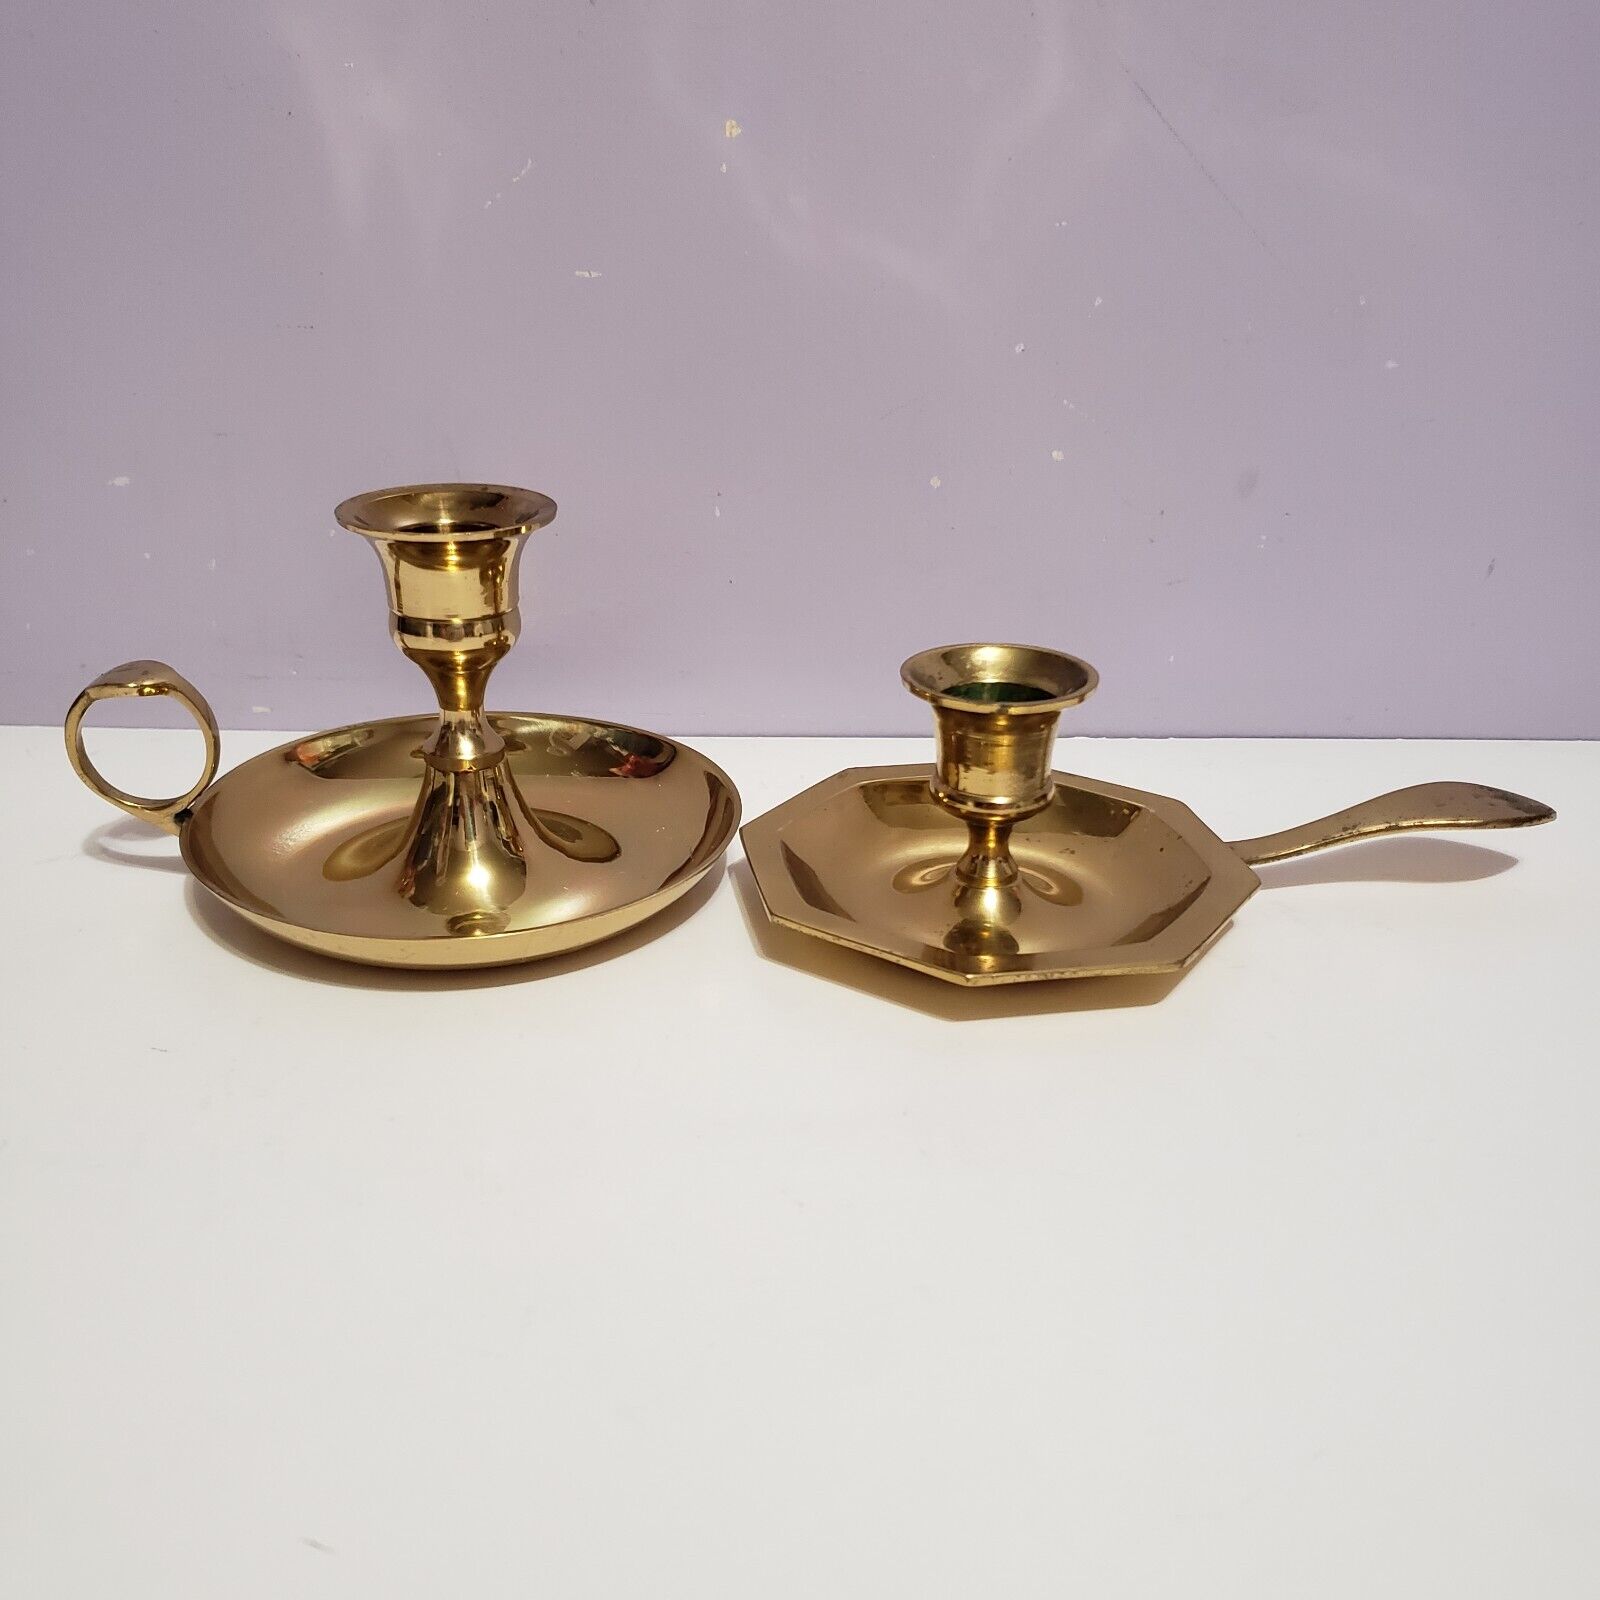 Brass Solid Standard Candle Holder w/Handles Lot of 2 Assorted